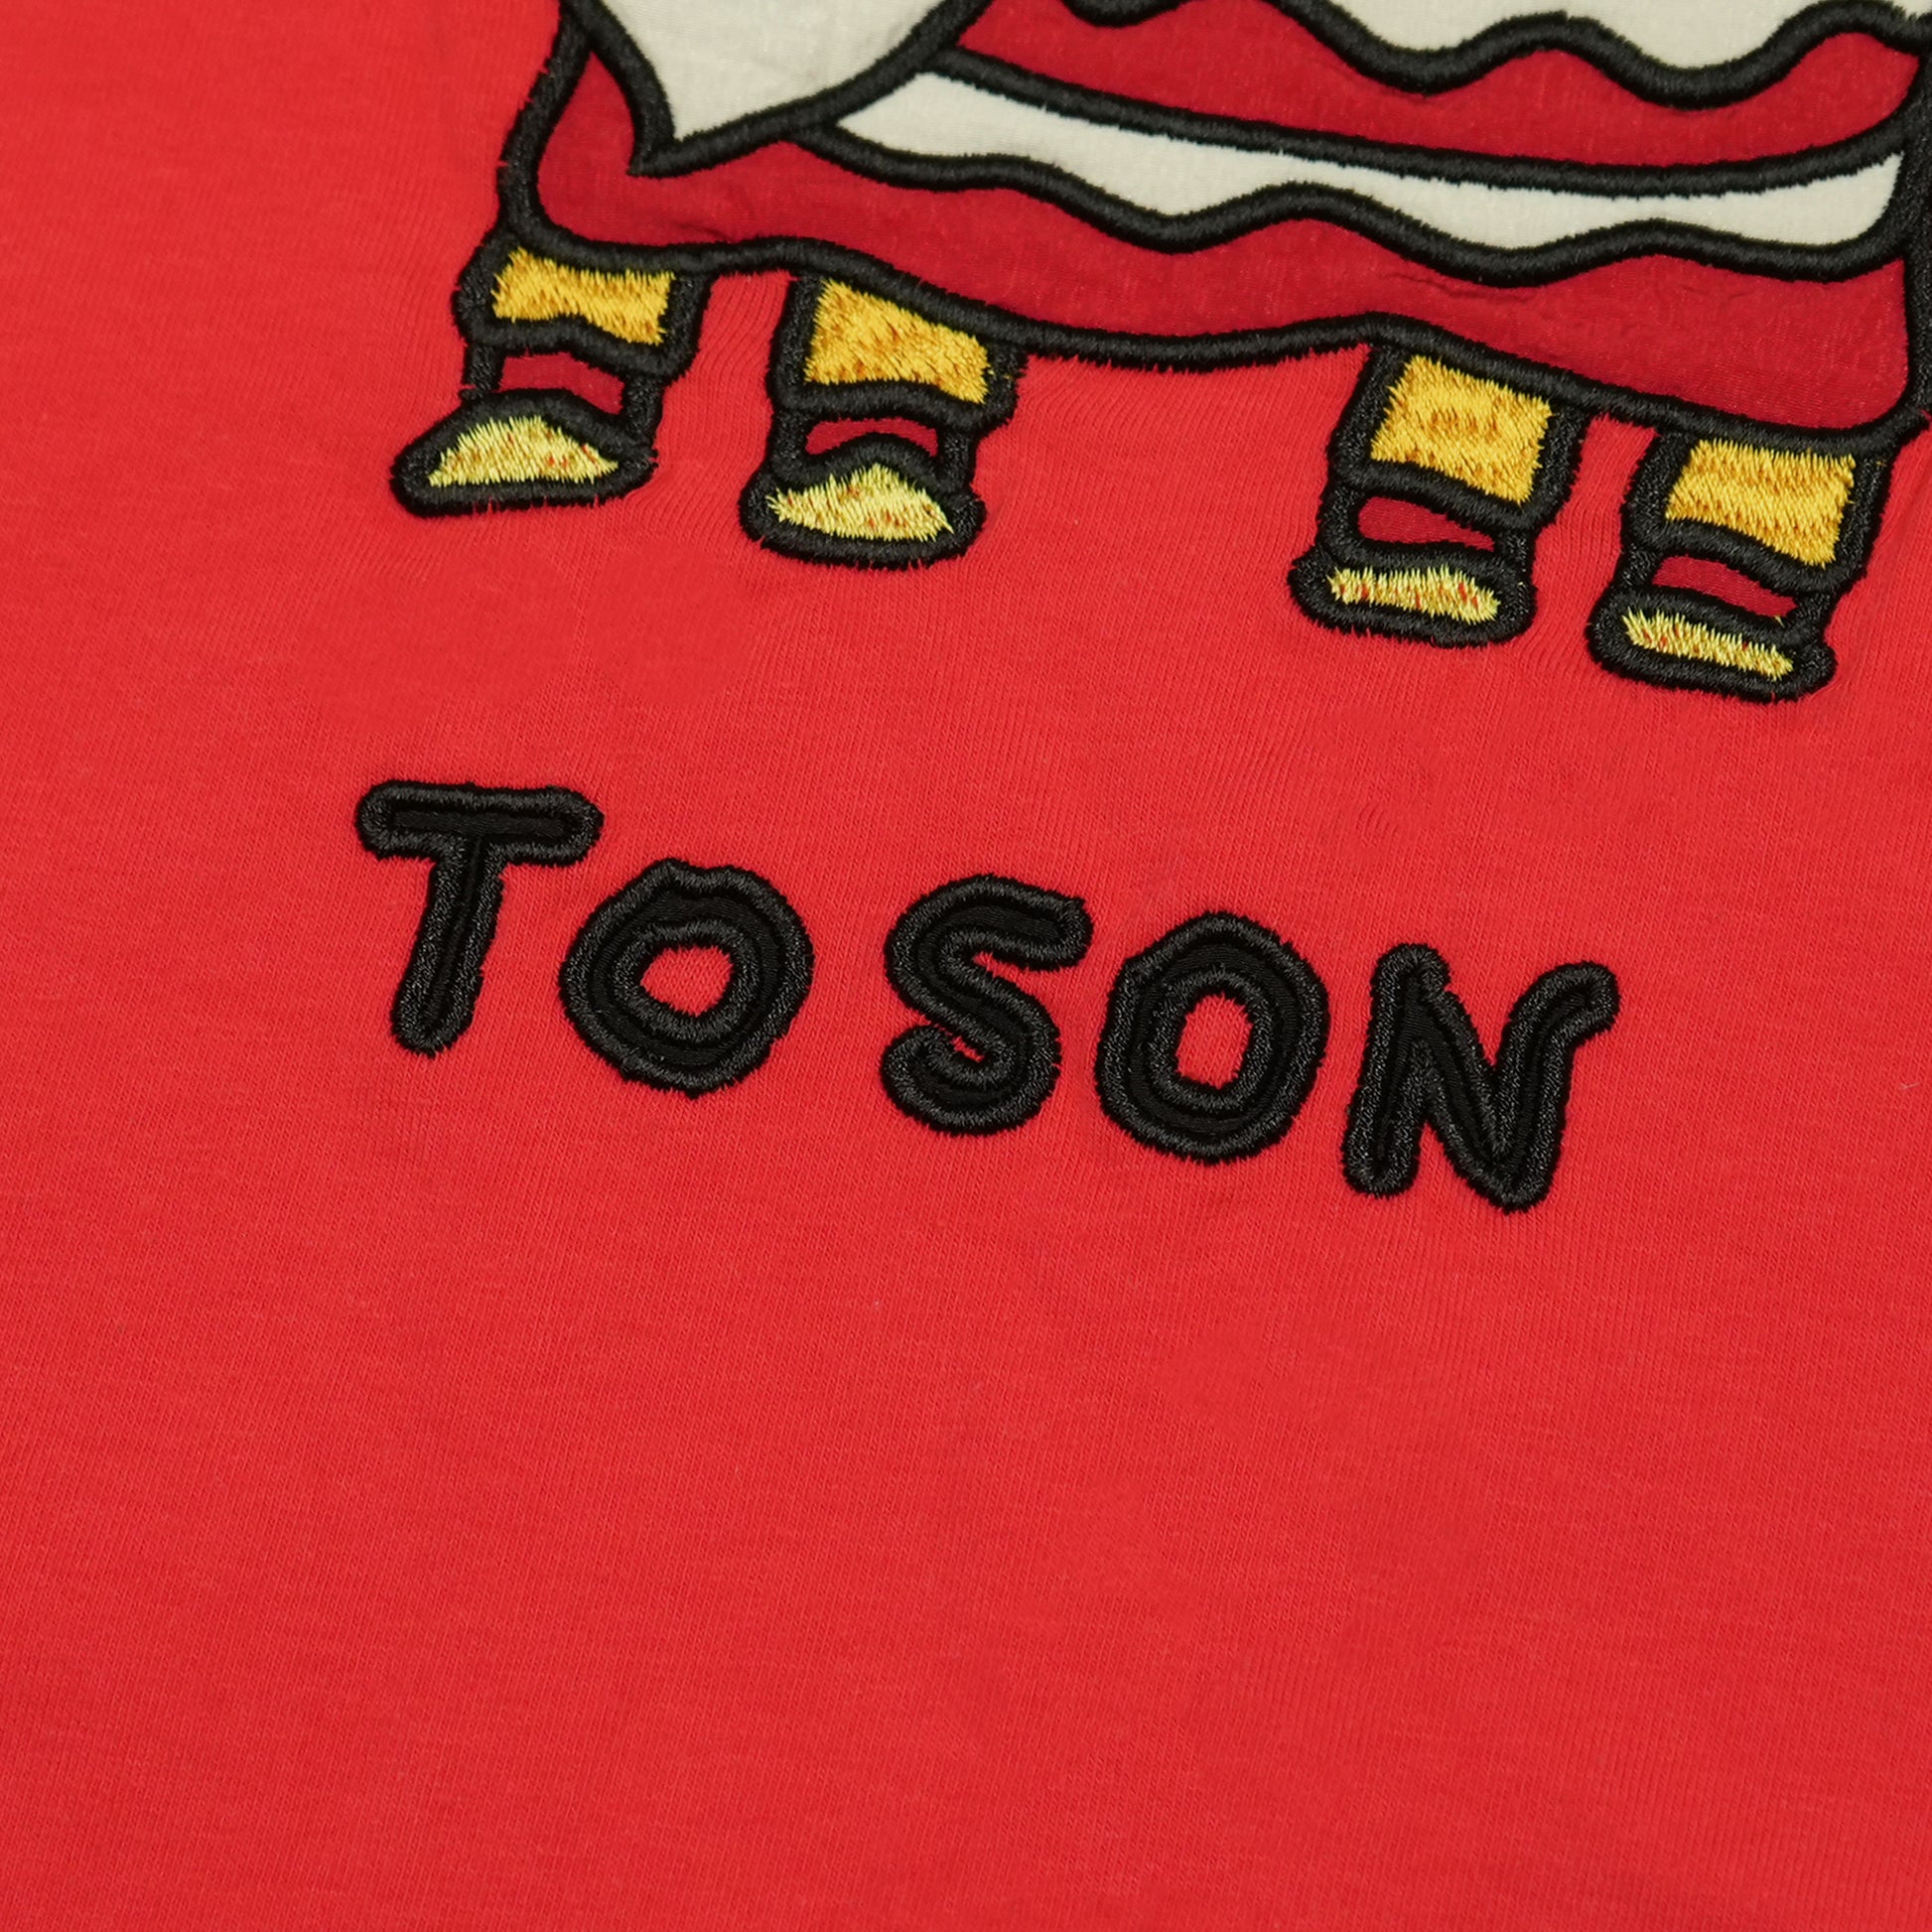 Toson, Kid - "LionDance" Patchwork Long Sleeve T-shirt - Red